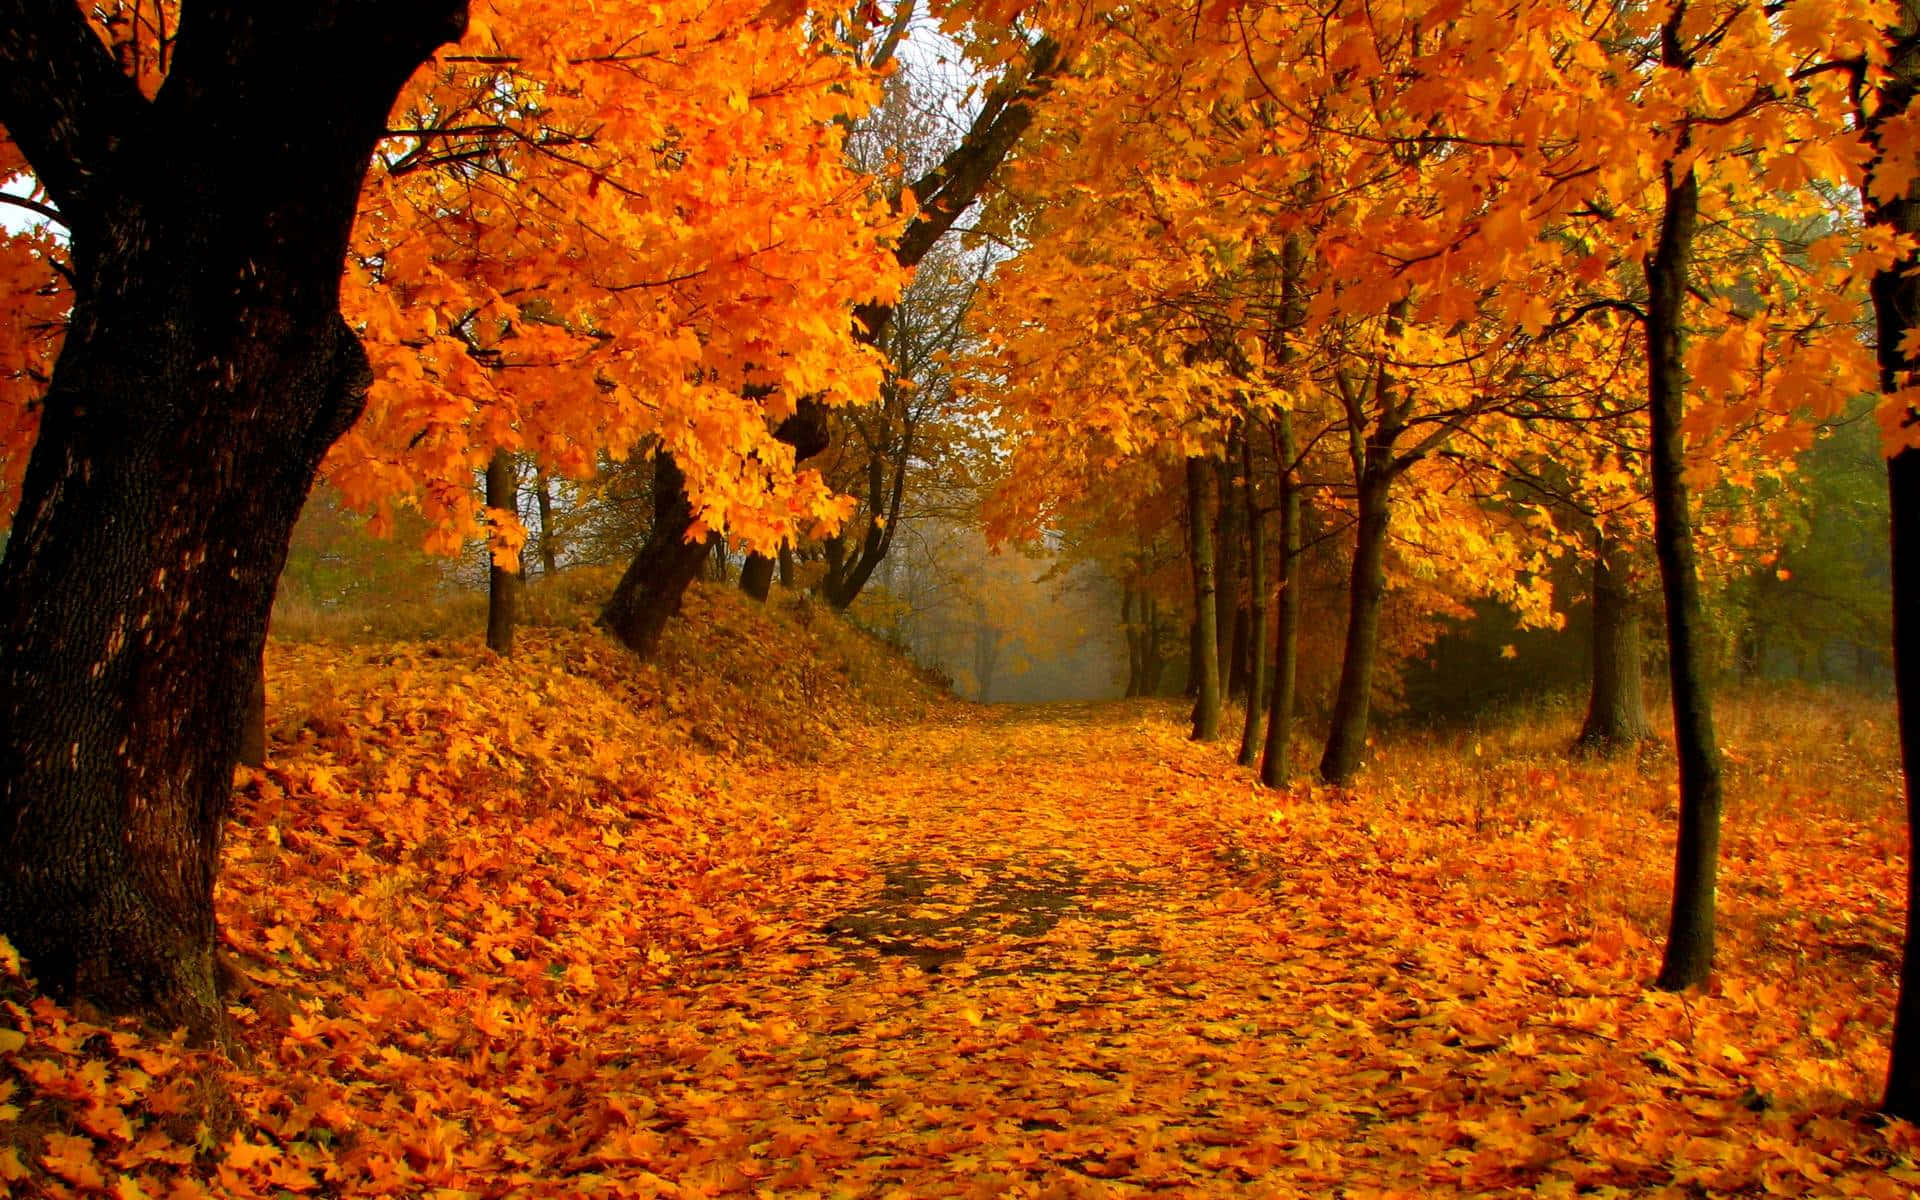 Captivating Fall Scenery in High Resolution